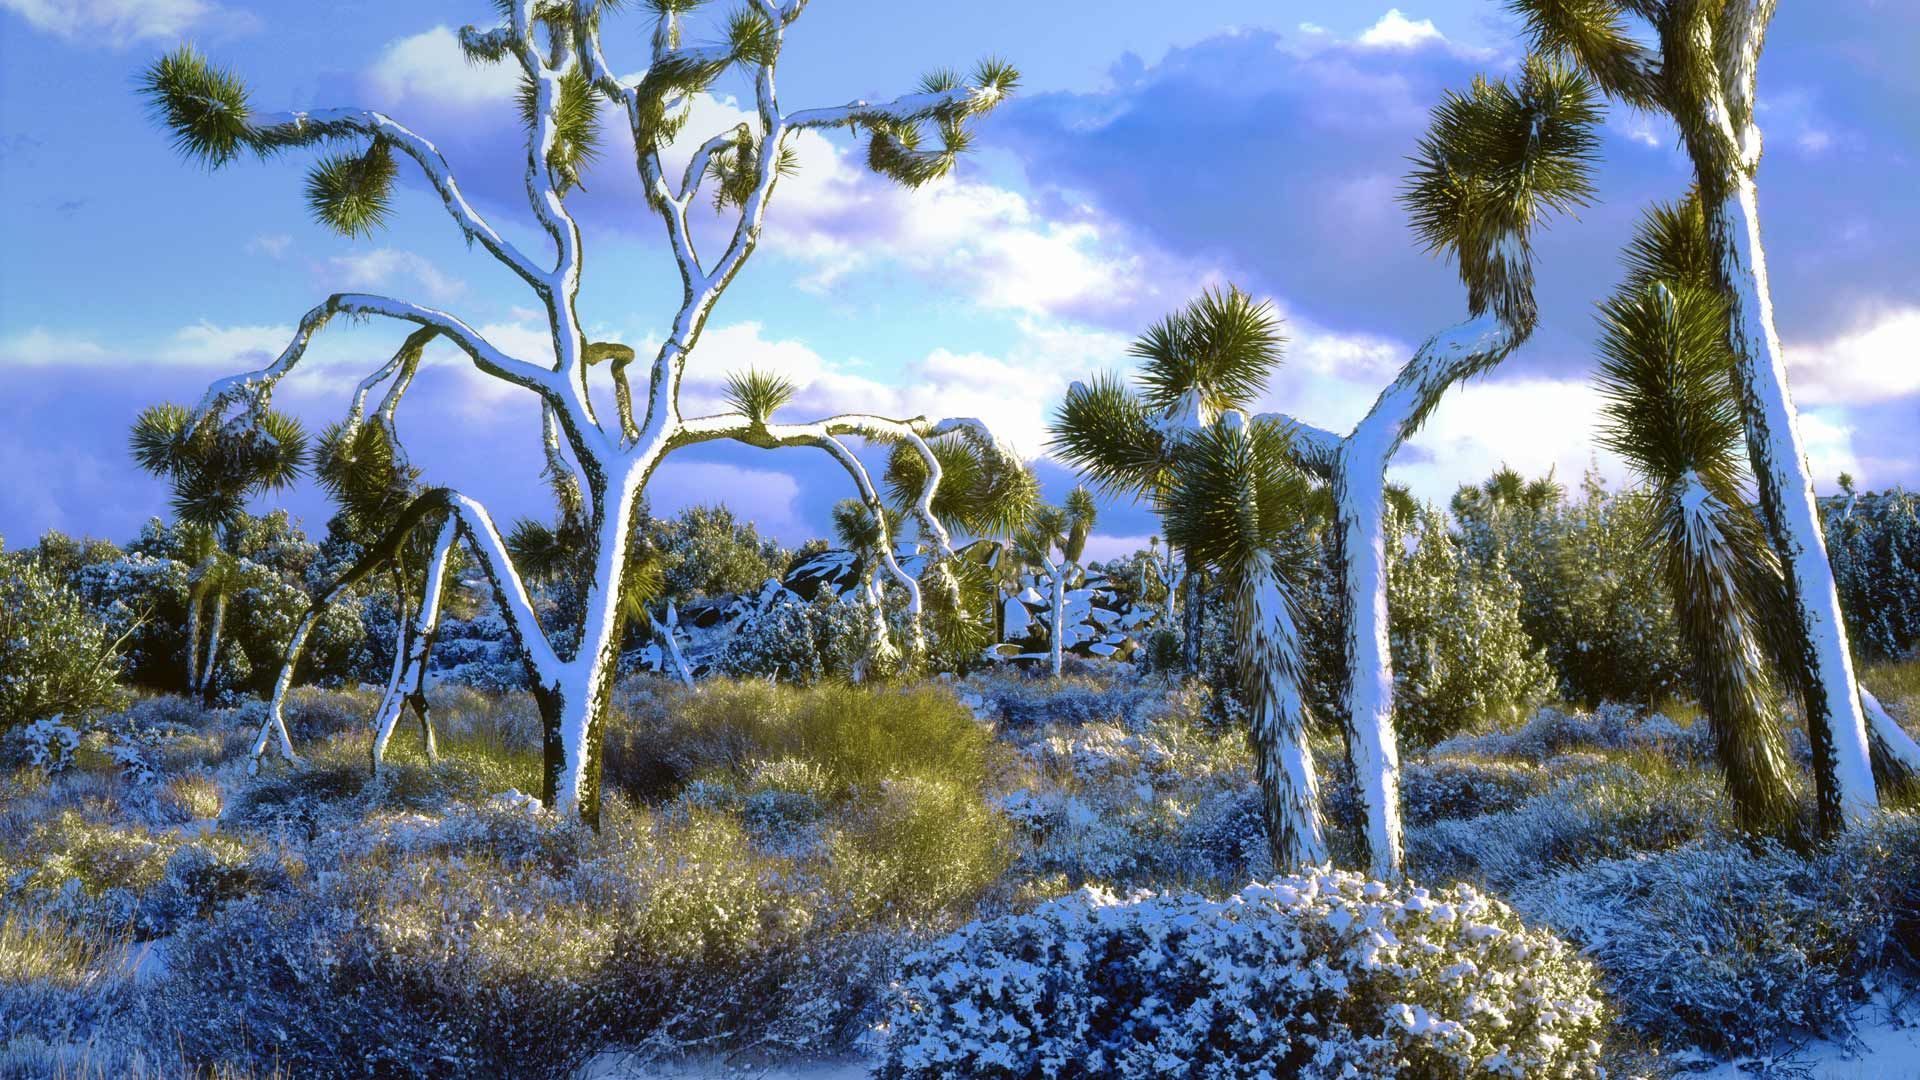 the front page of the internet. Joshua tree national park, Joshua tree, National parks